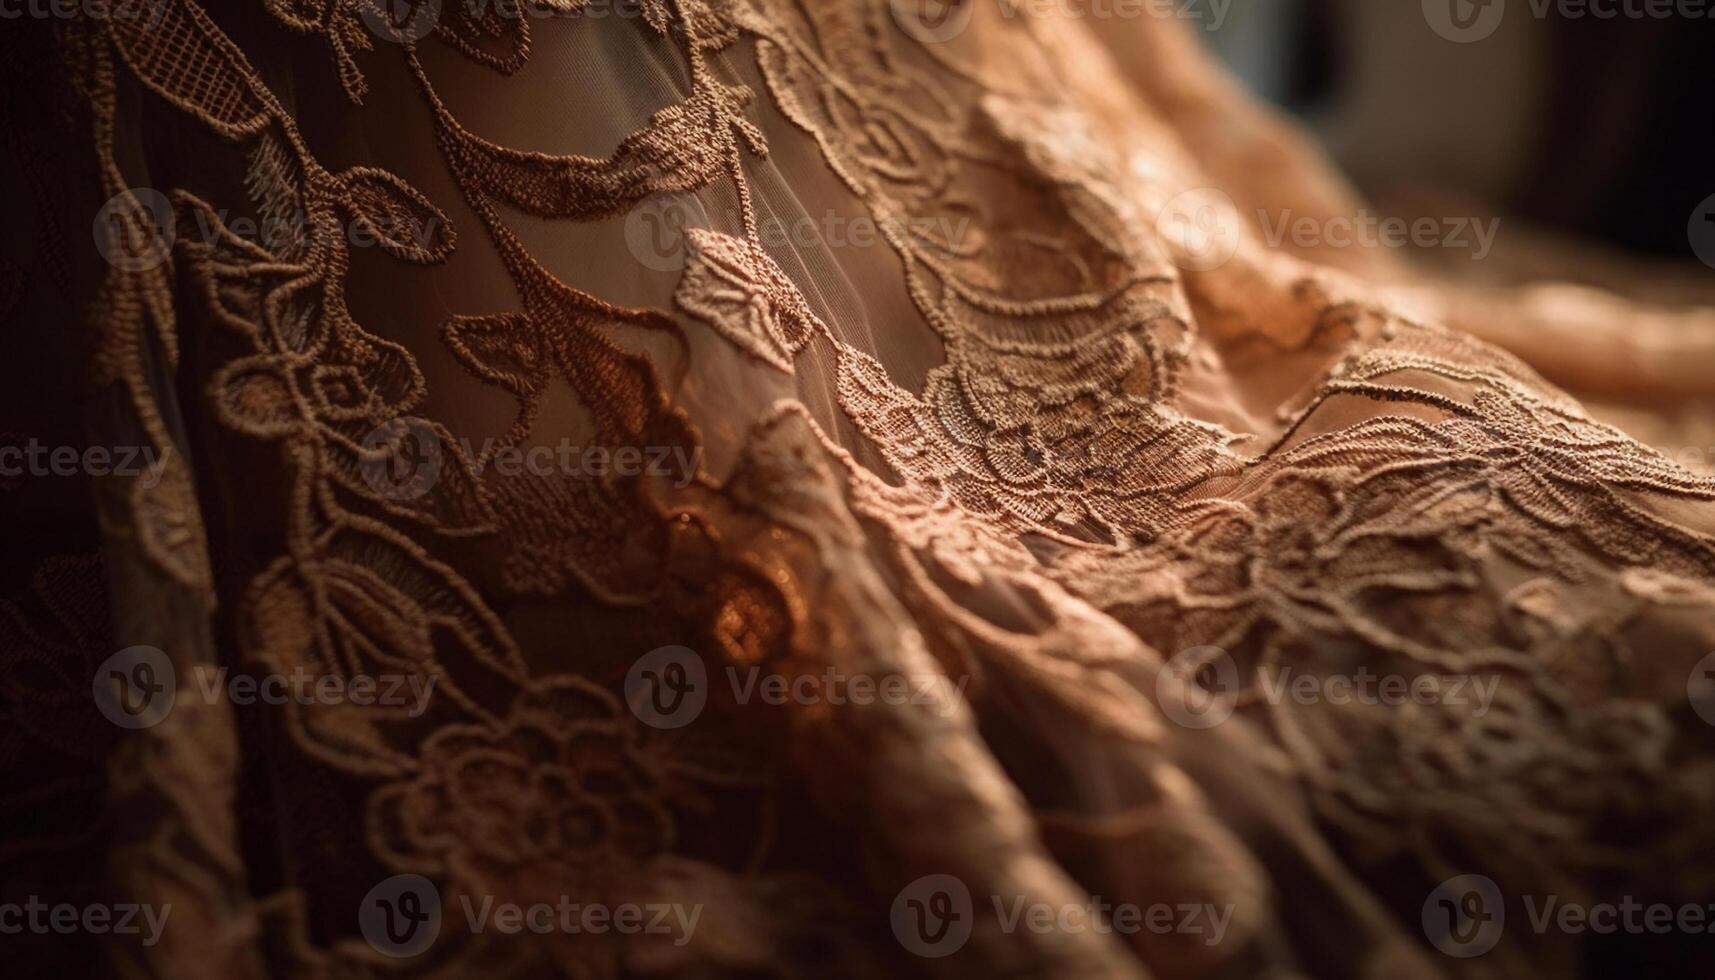 Antique lace adds elegance to old fashioned satin bedding in bedroom decor generated by AI photo